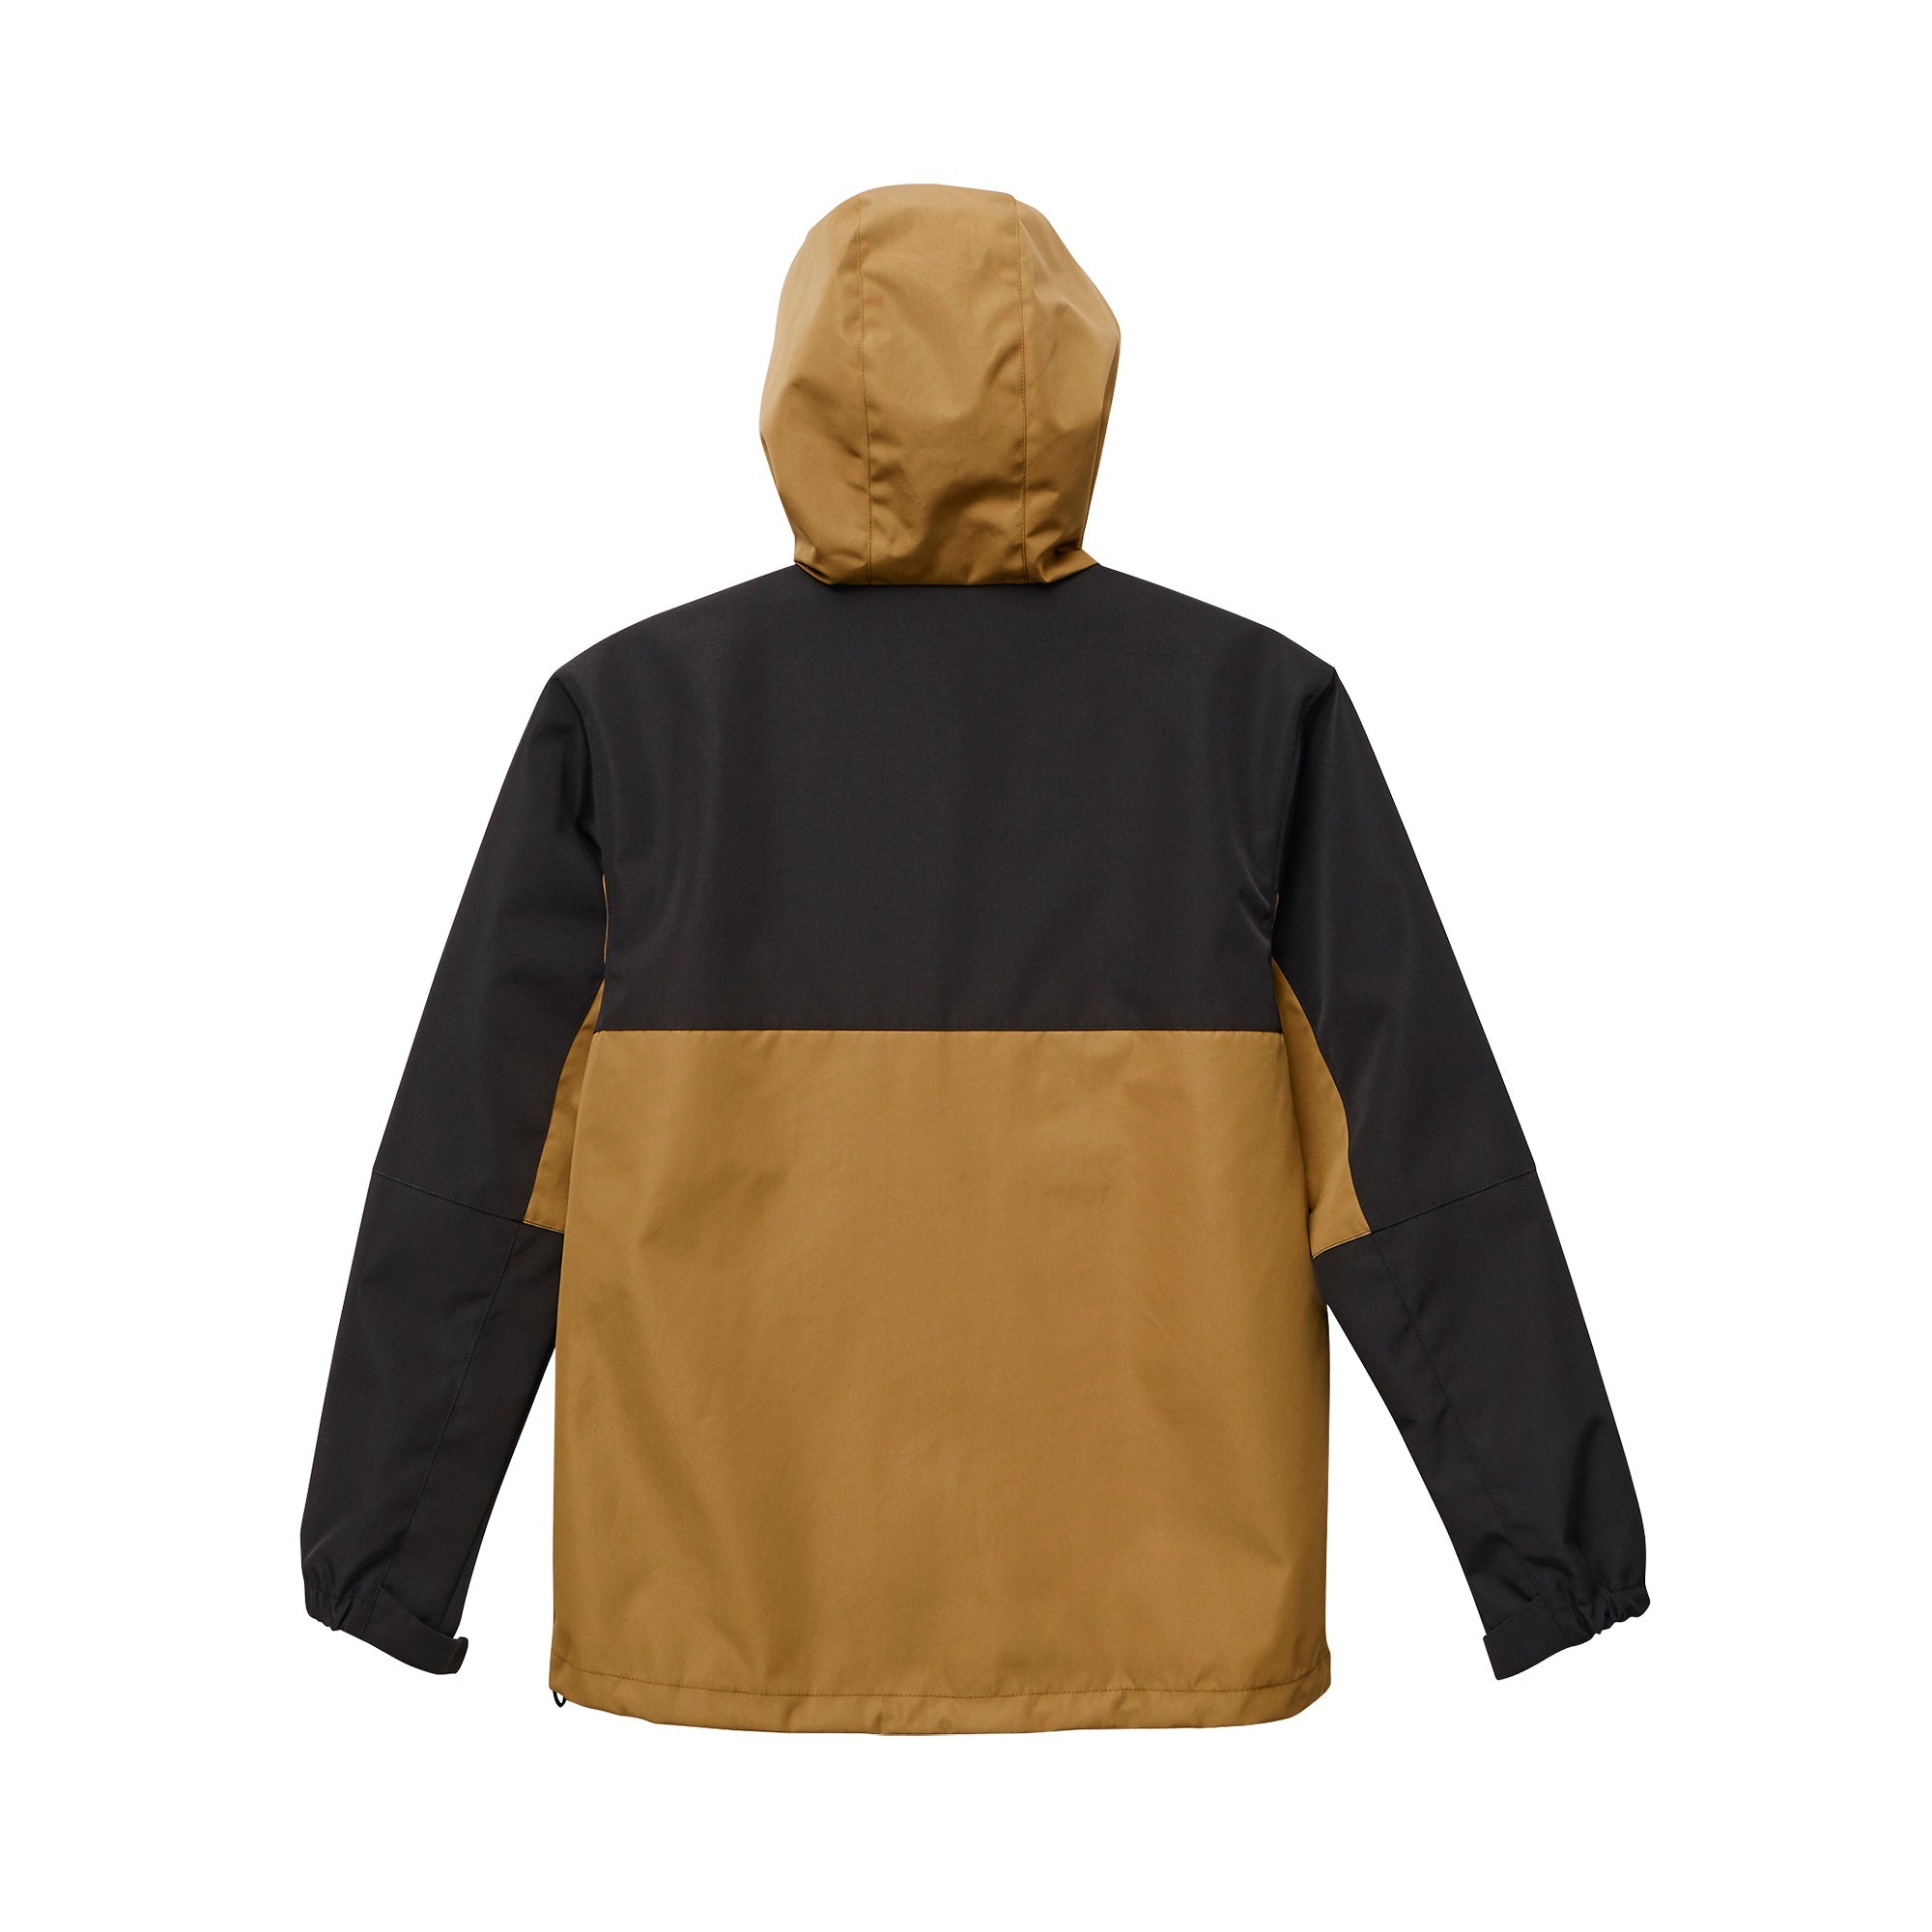 7489 - Switching shell parka - Coyote Brown / Black x 2